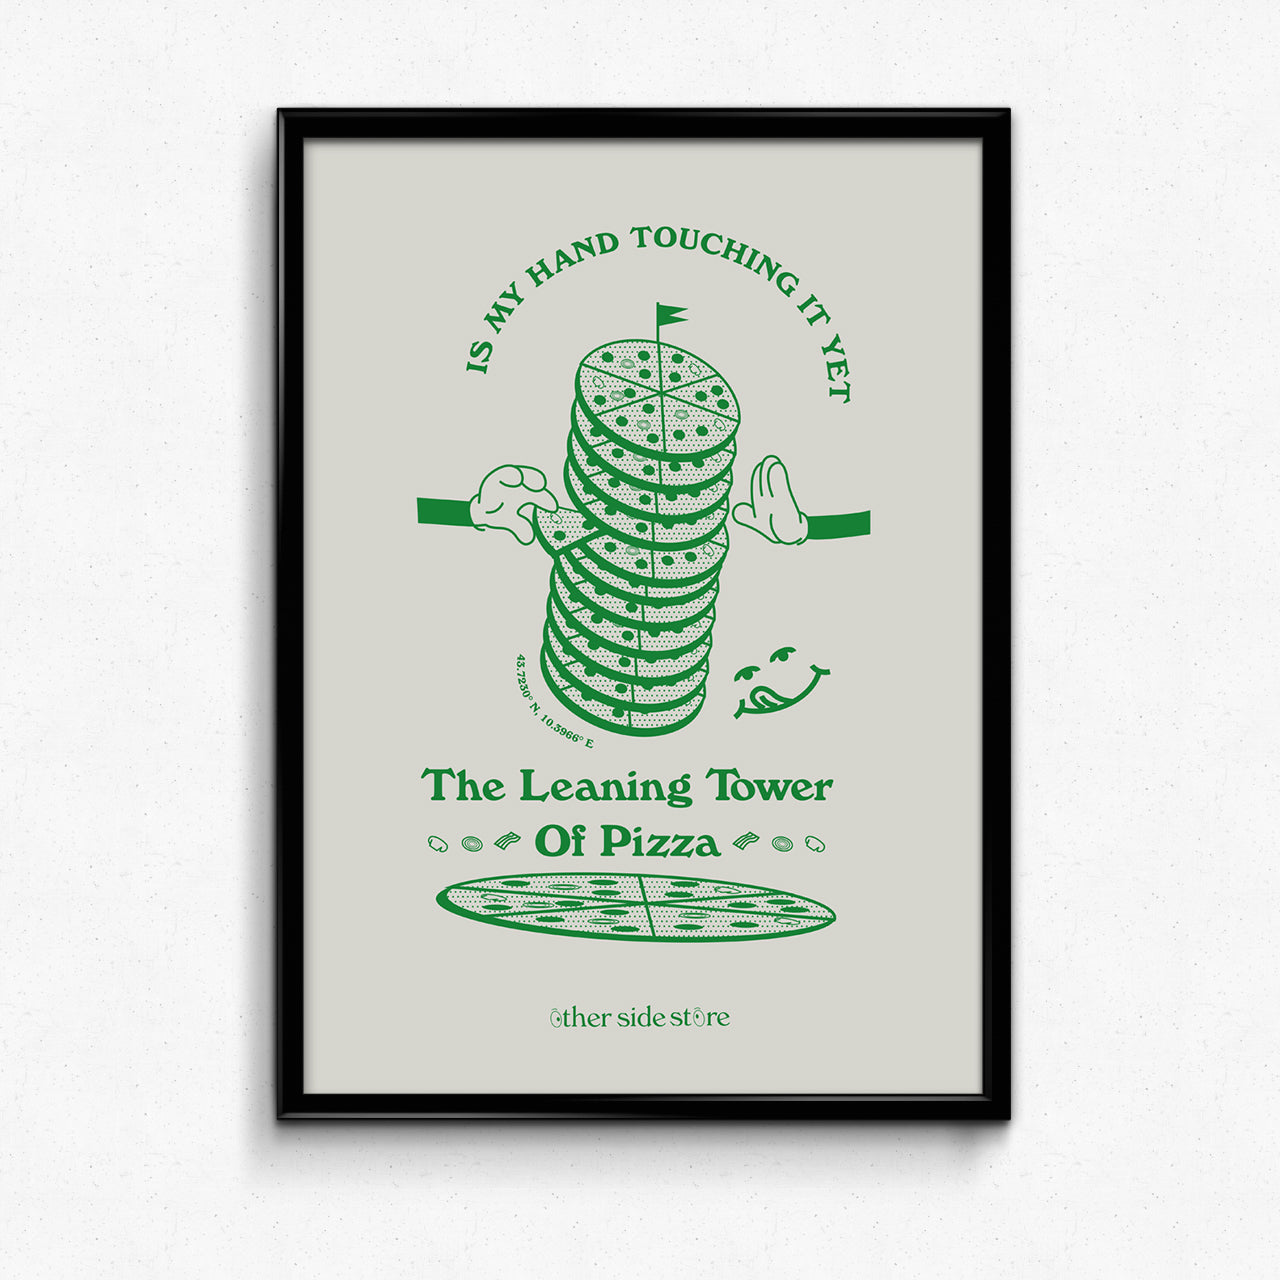 Other Side Store 'Leaning Tower' Art Print